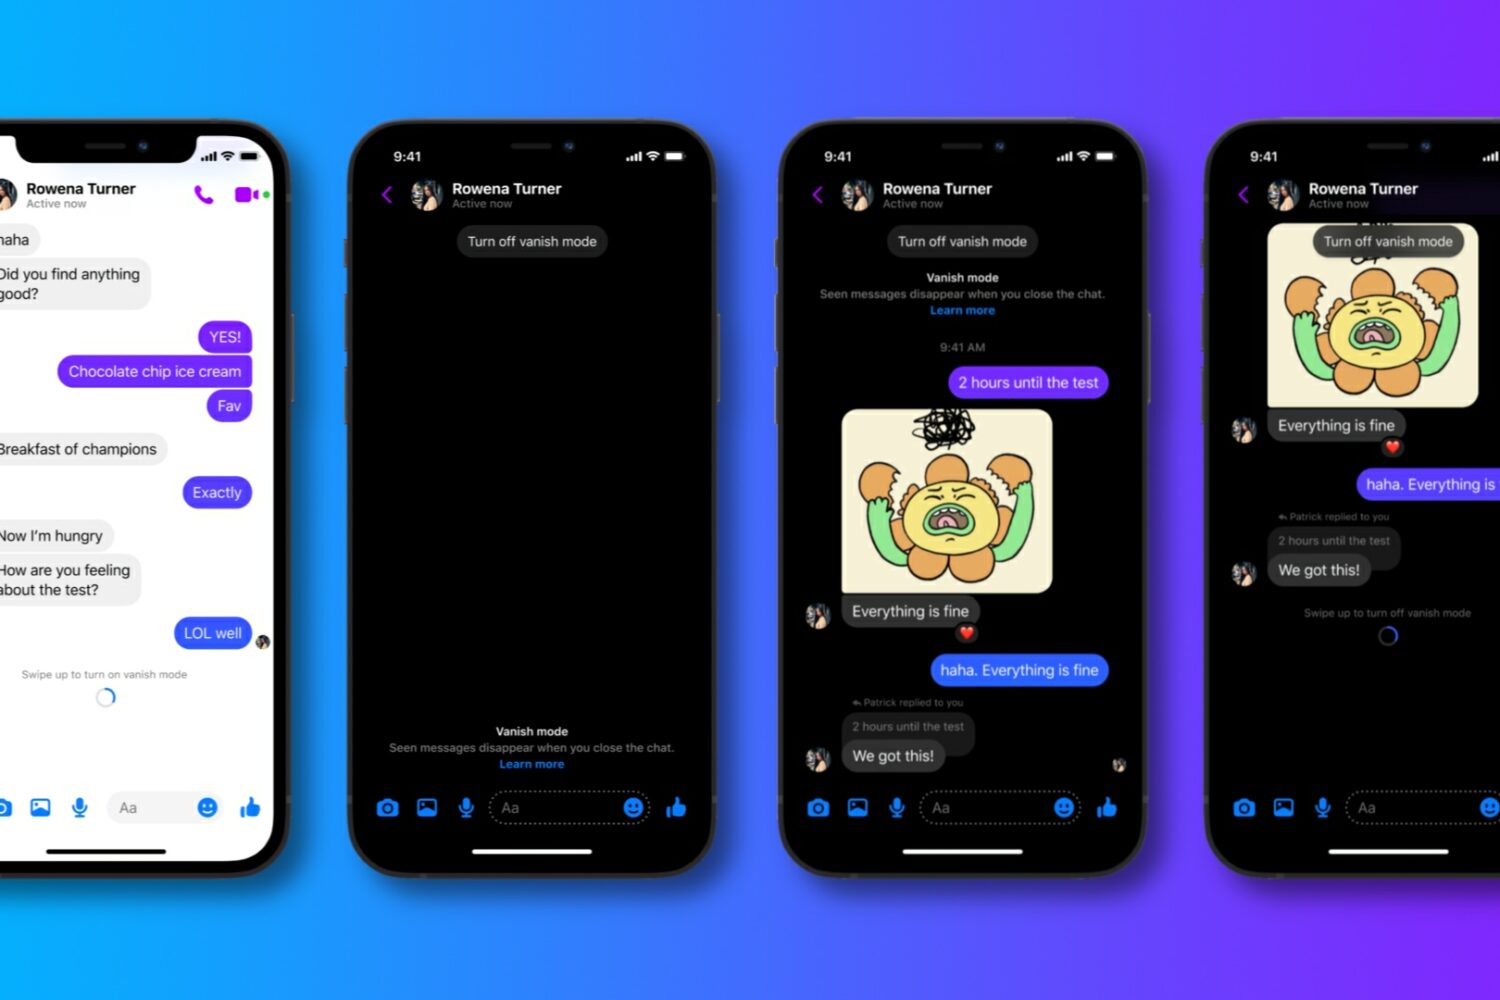 Four device screenshots showcasing Vanish Mode in Facebook Messenger for iPhone